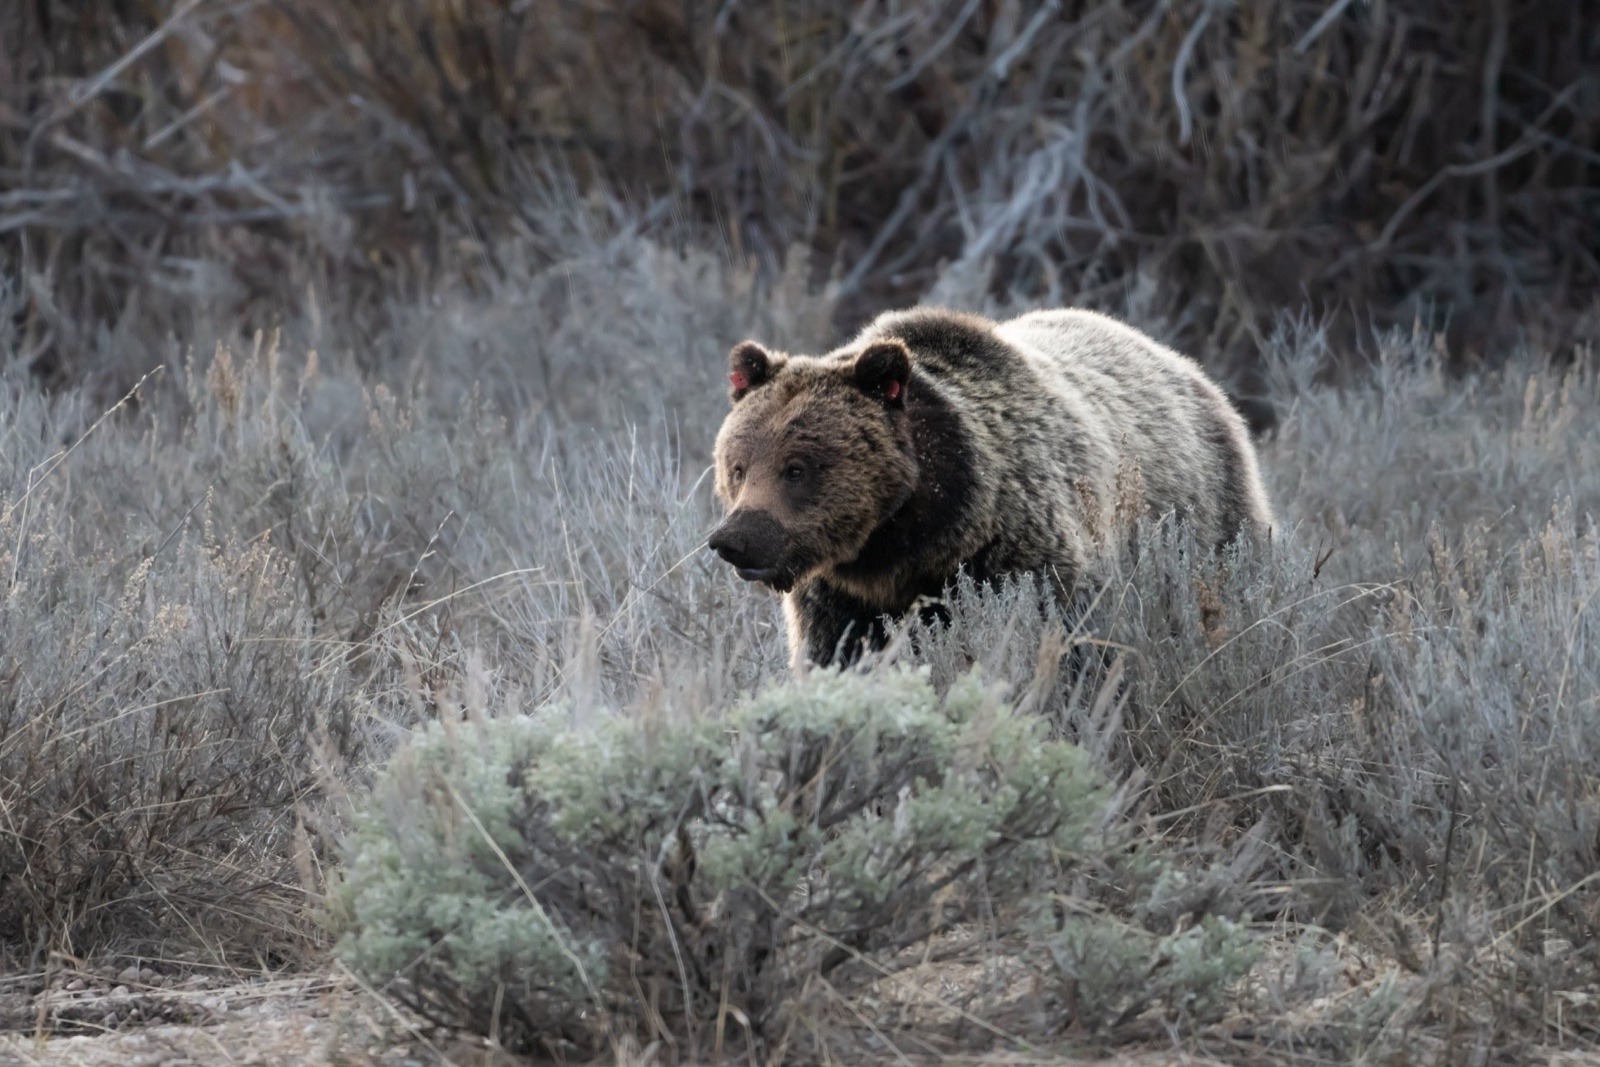 A grizzly that inhabits Grand Teton National Park and the adjacent national forest. Wilderness areas in Greater Yellowstone and other parts of the northern Rockies are different from wilderness areas elsewhere in the West. They function as refugia for grizzlies.  Photo courtesy C. Adams/NPS